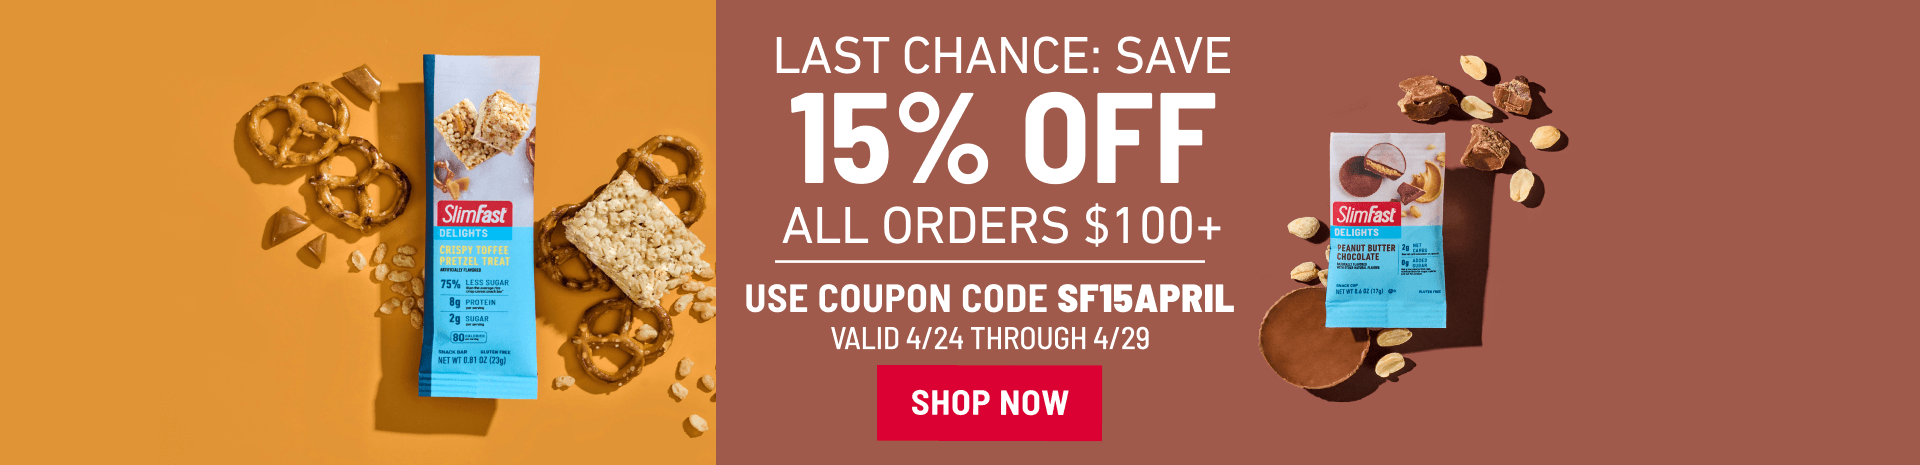 Save 15 percent off order over $100